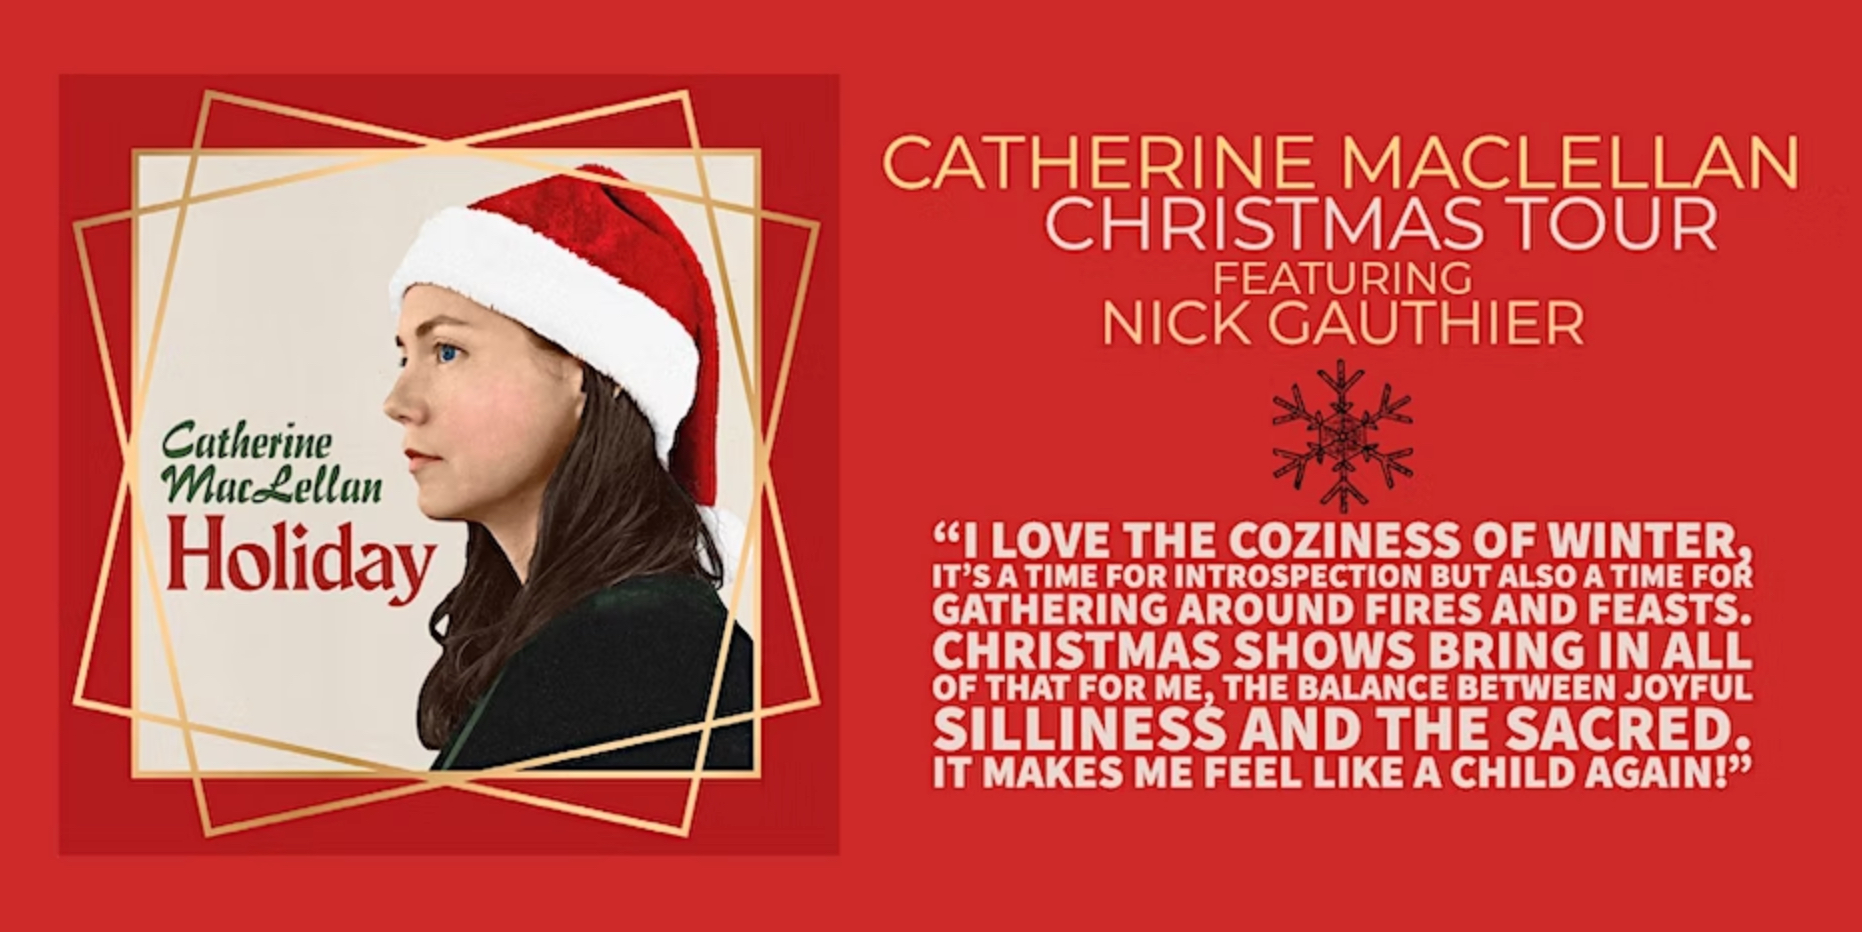 Catherine MacLellan Christmas Tour featuring Nick Gauthier. "I love the coziness of winter. It's a time for gathering around fires and feasts. Christmas shows bring in all of that for me, the balance between joyful silliness and the sacred. It makes me feel like a child again."